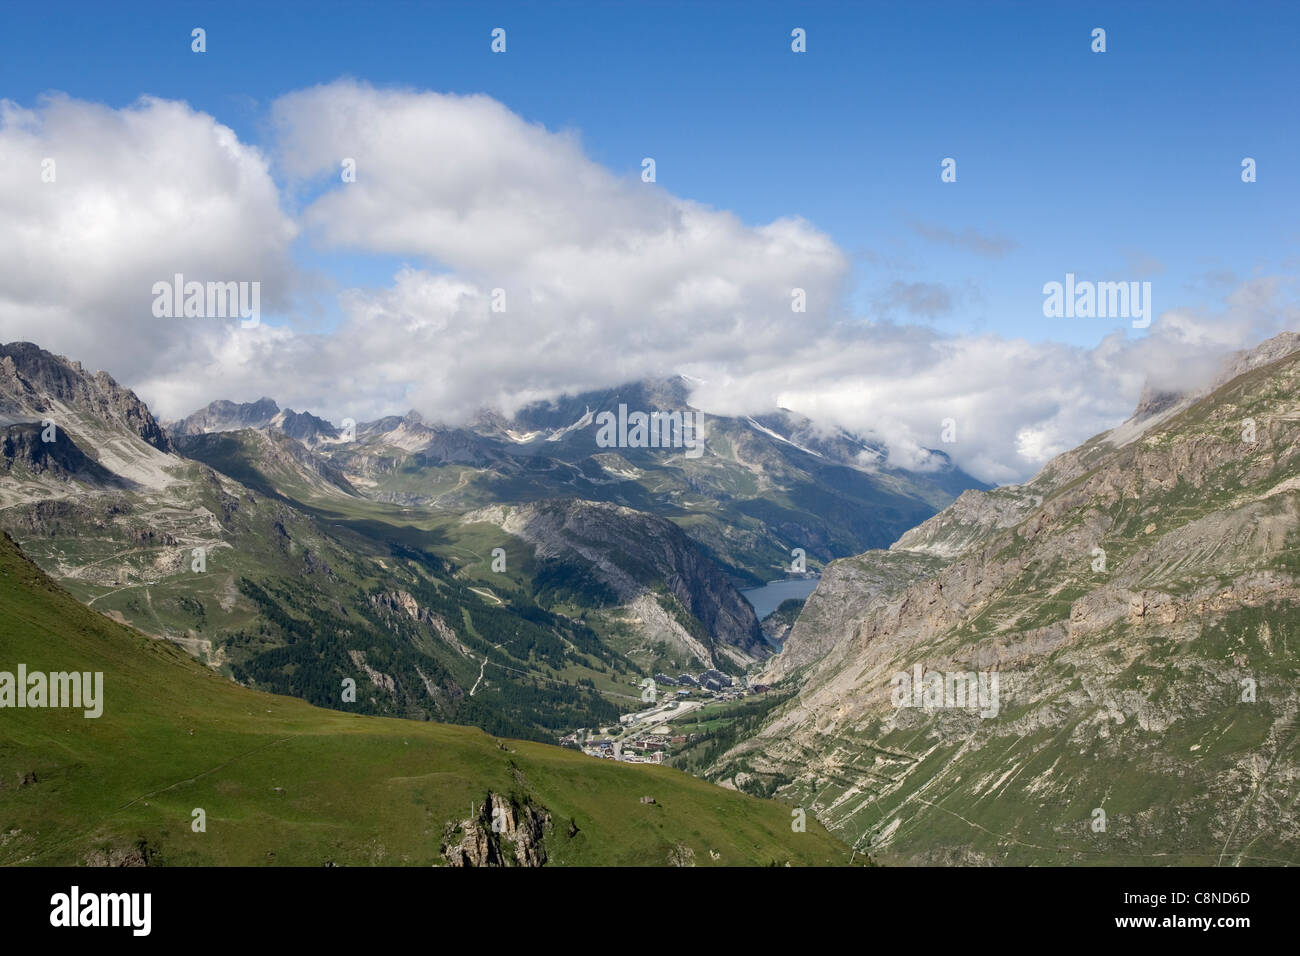 France, Savoie, view of Val d'Isere and Lac du Chevril from the Col de l'Iseran Stock Photo